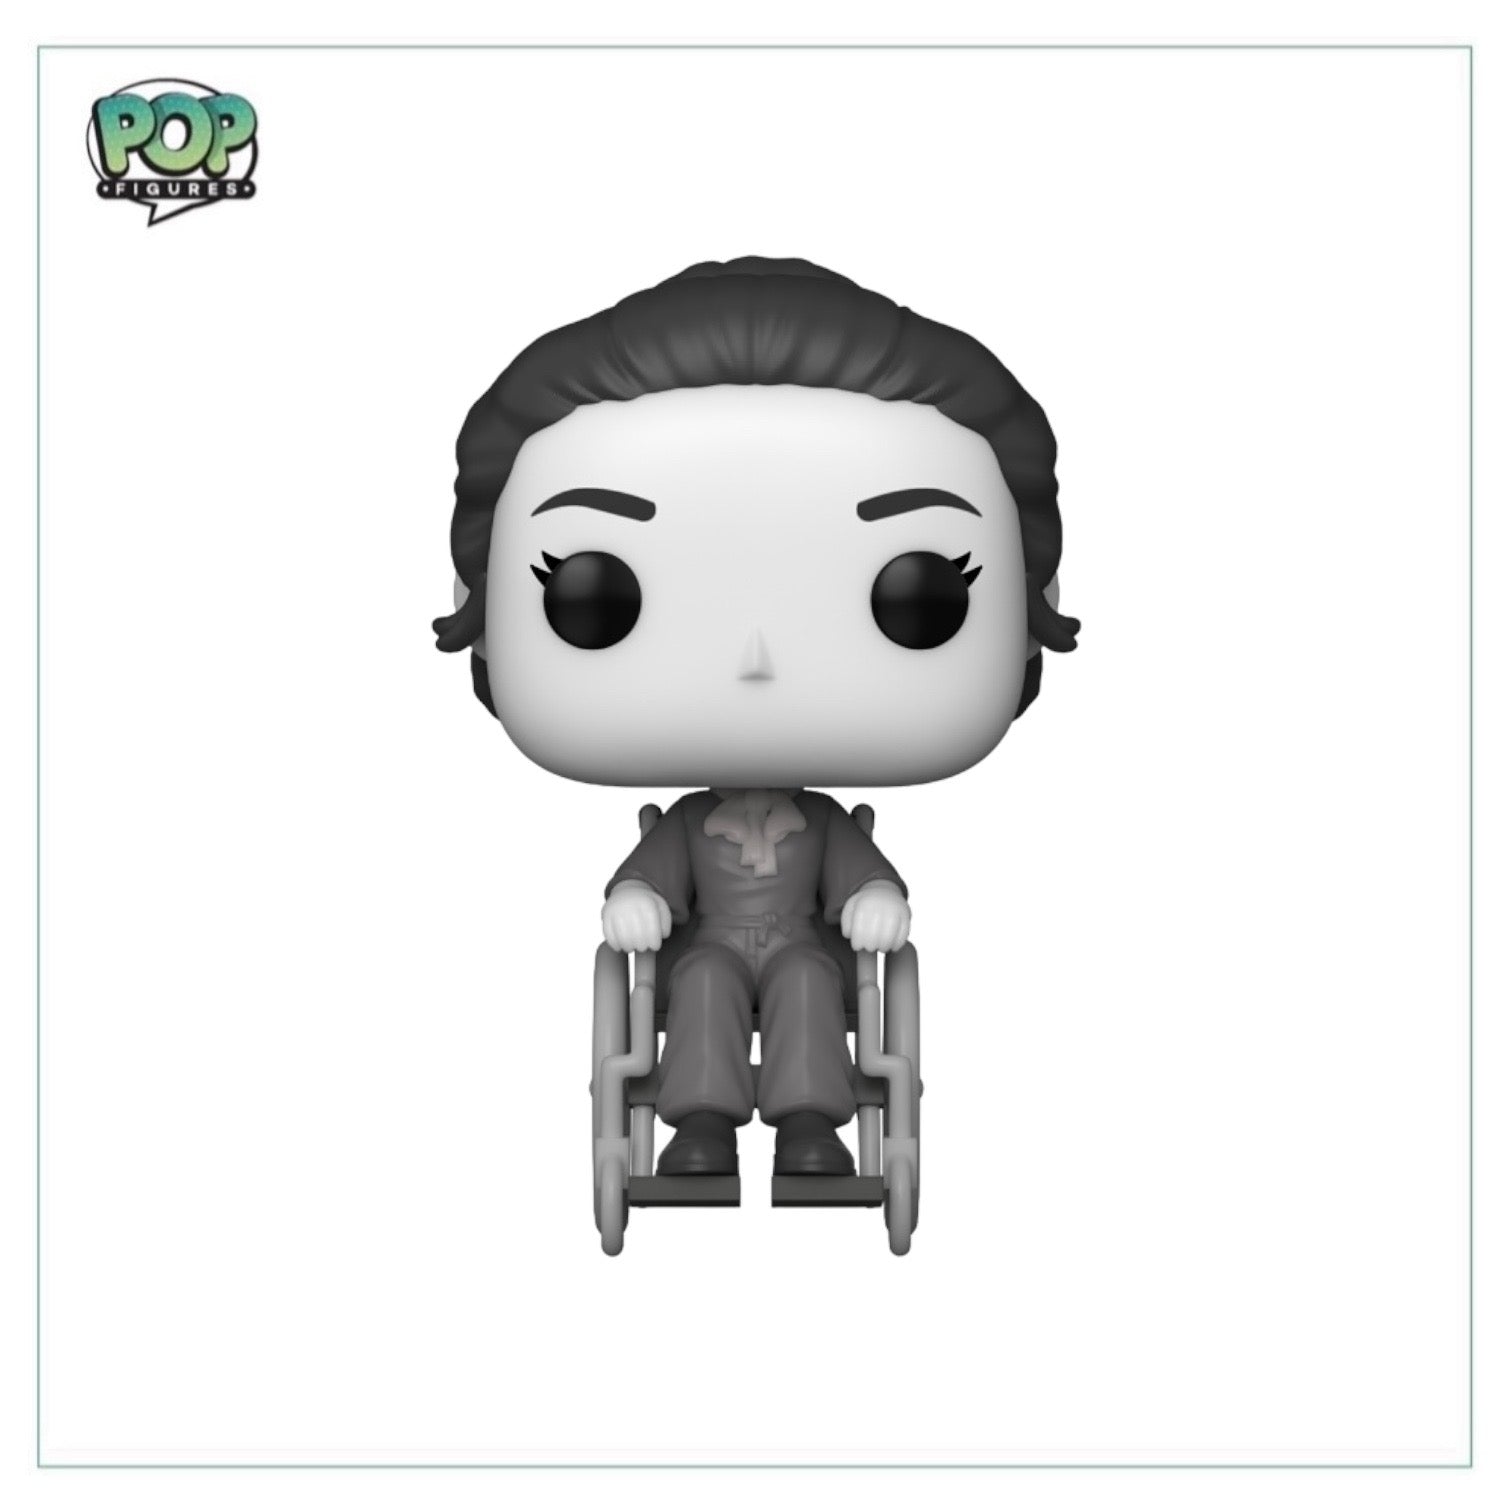 Blanche Hudson #1416 (Black and White Chase) Funko Pop! - What Ever Happened to Baby Jane